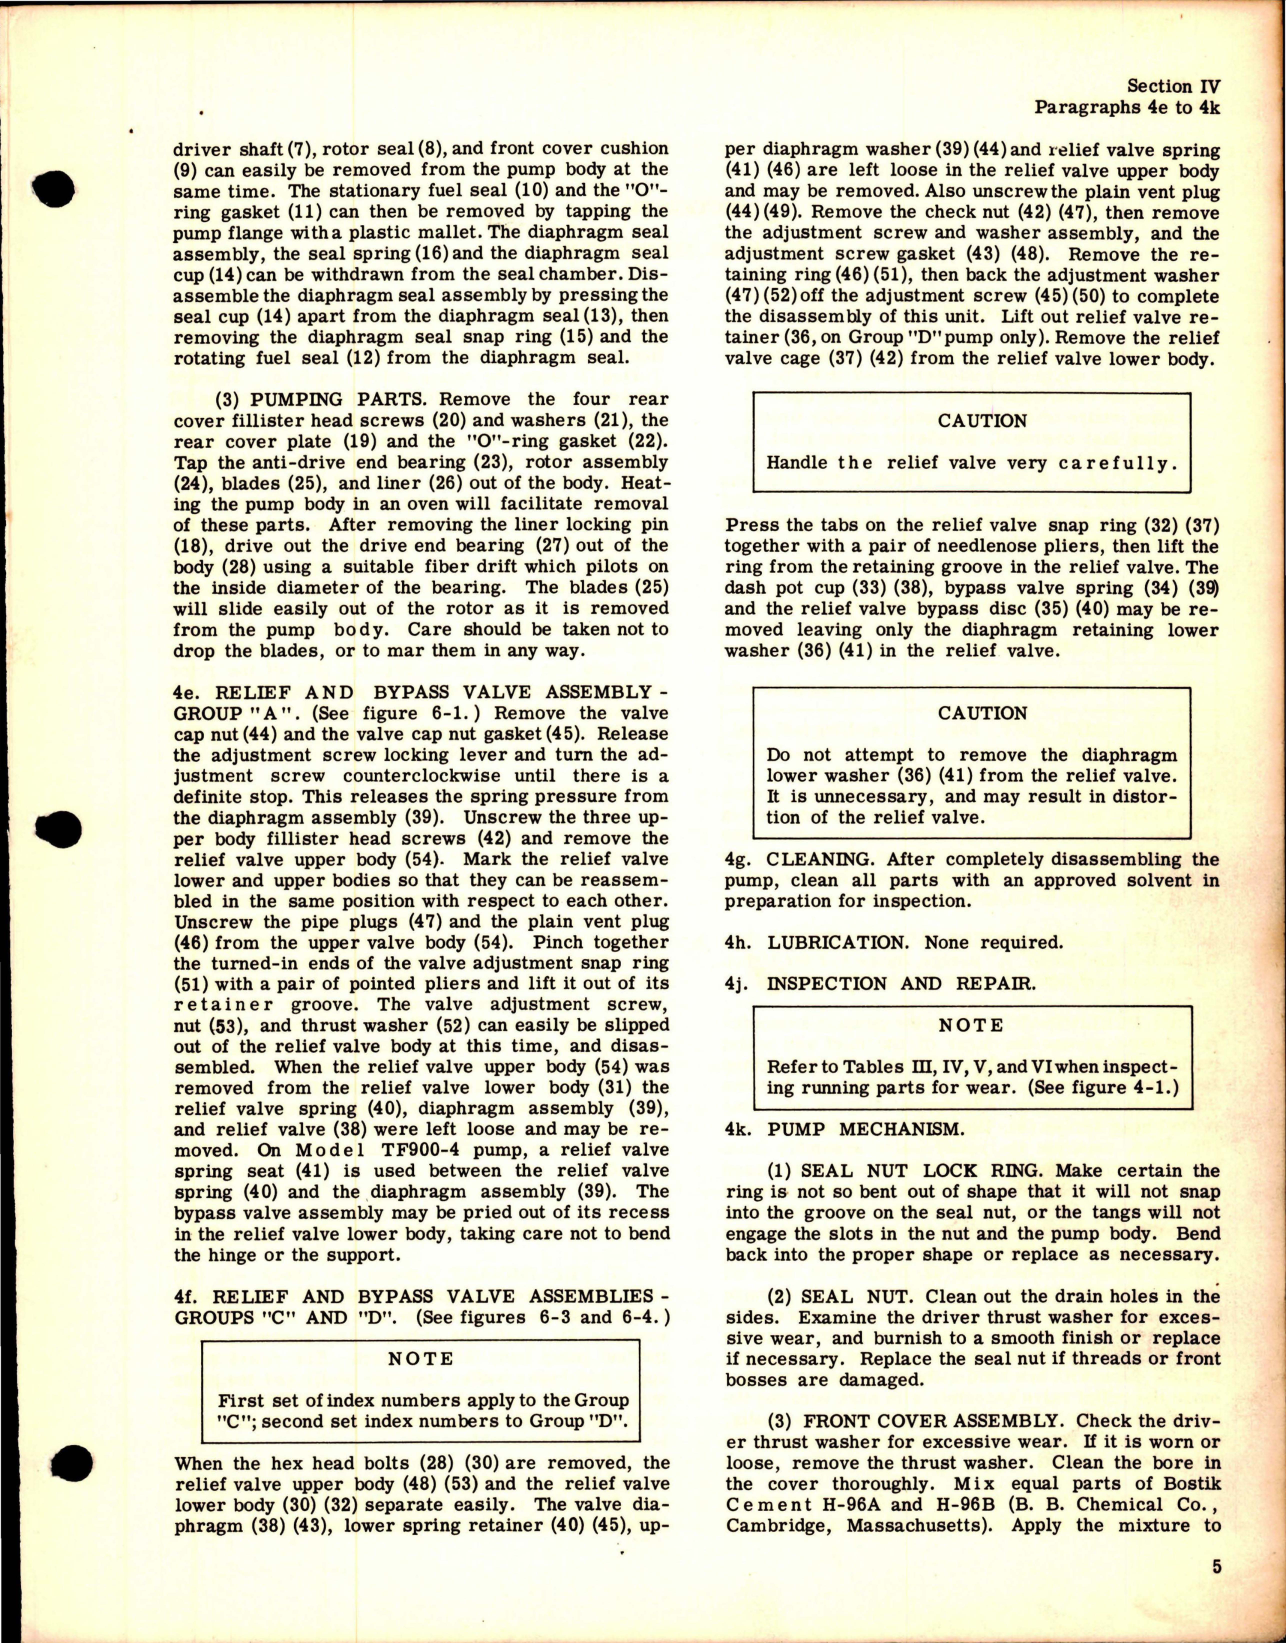 Sample page 7 from AirCorps Library document: Overhaul Instructions for Engine Driven Fuel Pumps